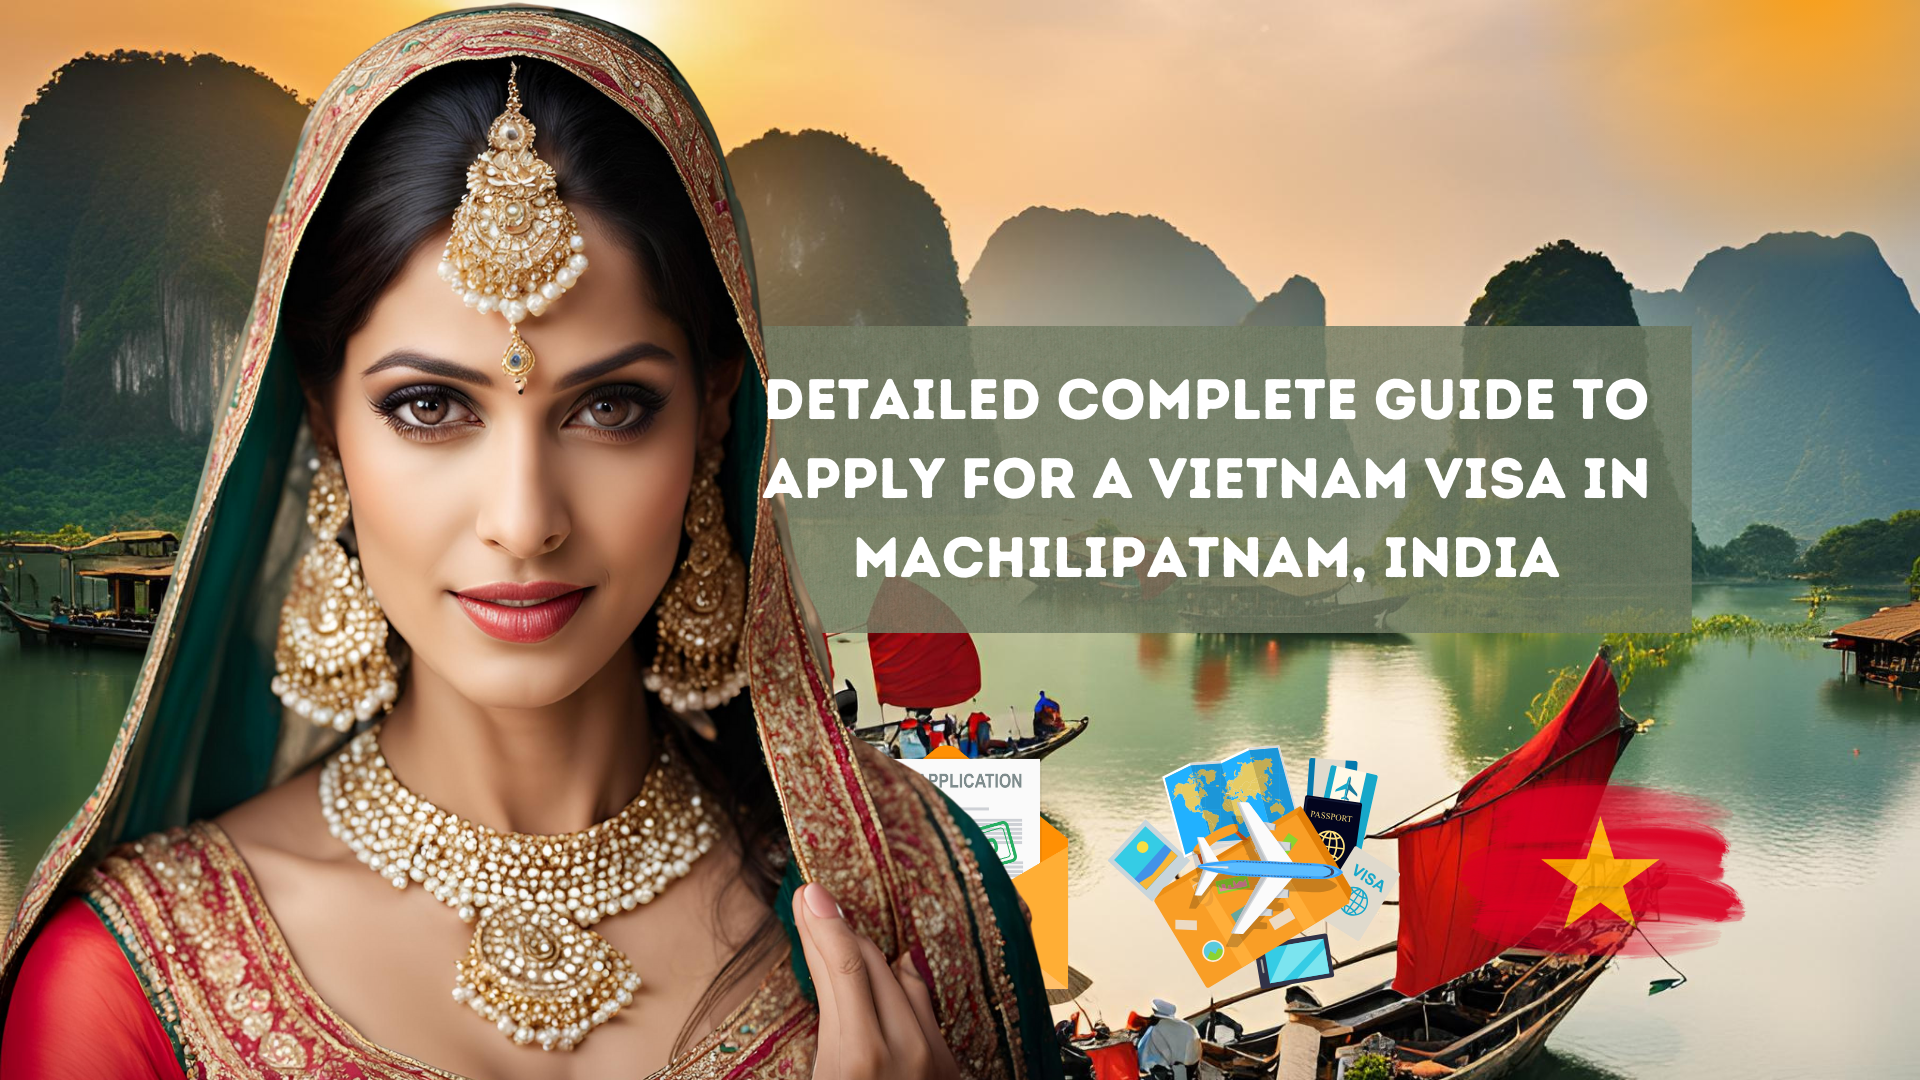 Detailed Complete Guide to Apply for a Vietnam Visa in Machilipatnam, India